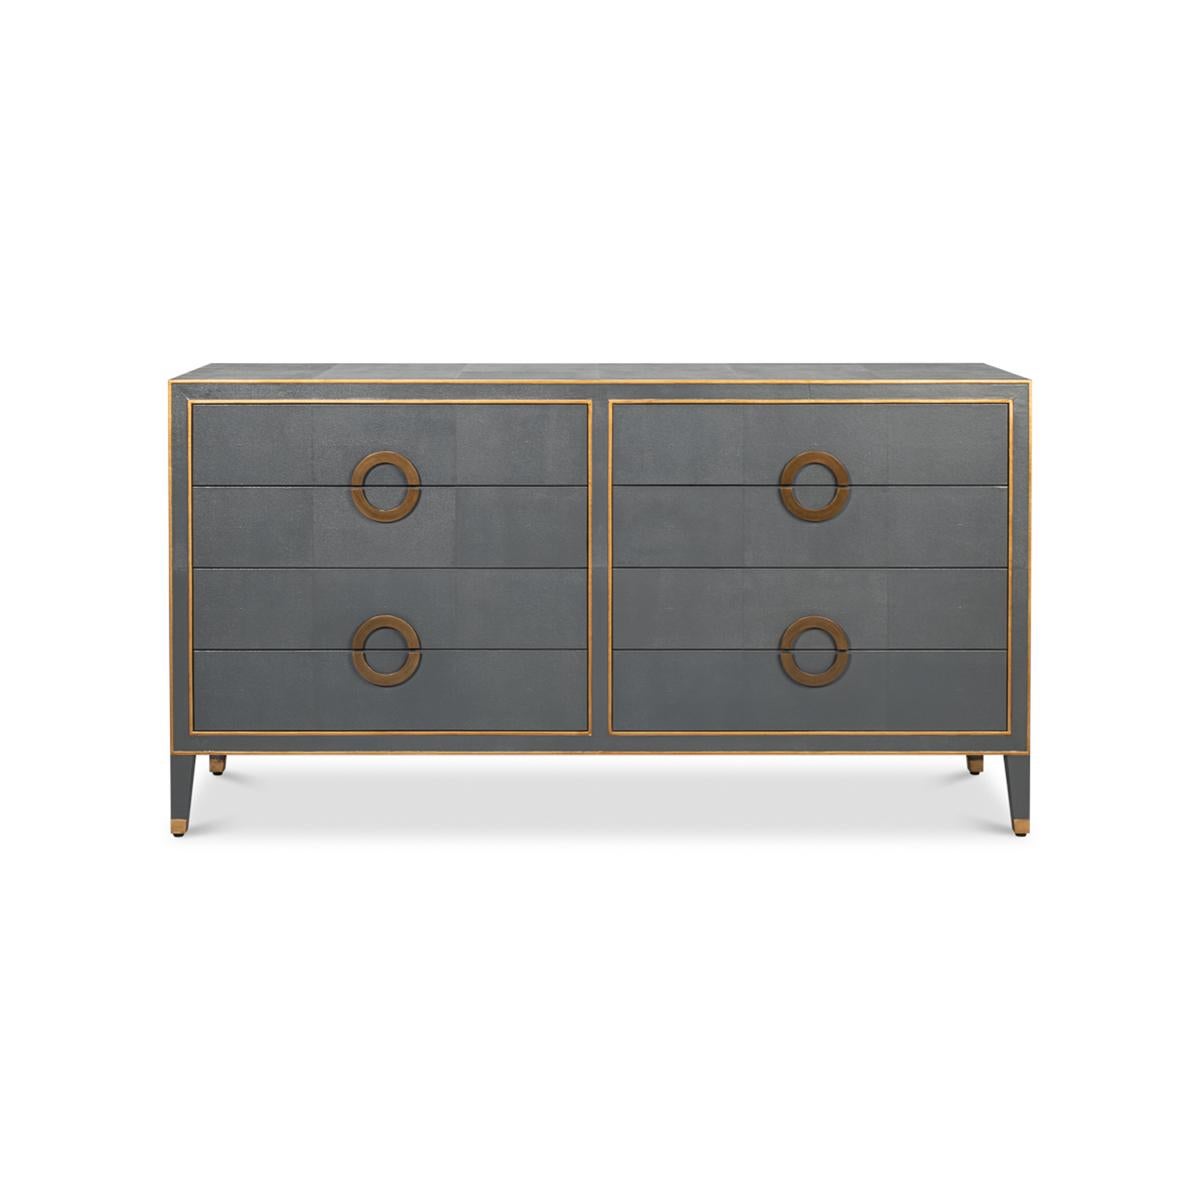 This exquisite piece features a rich gun metal or pewter grey shagreen embossed leather, which exudes an air of sophistication and luxury. The dresser is adorned with elegant gold ring handles and trim, adding a touch of glamour to its overall